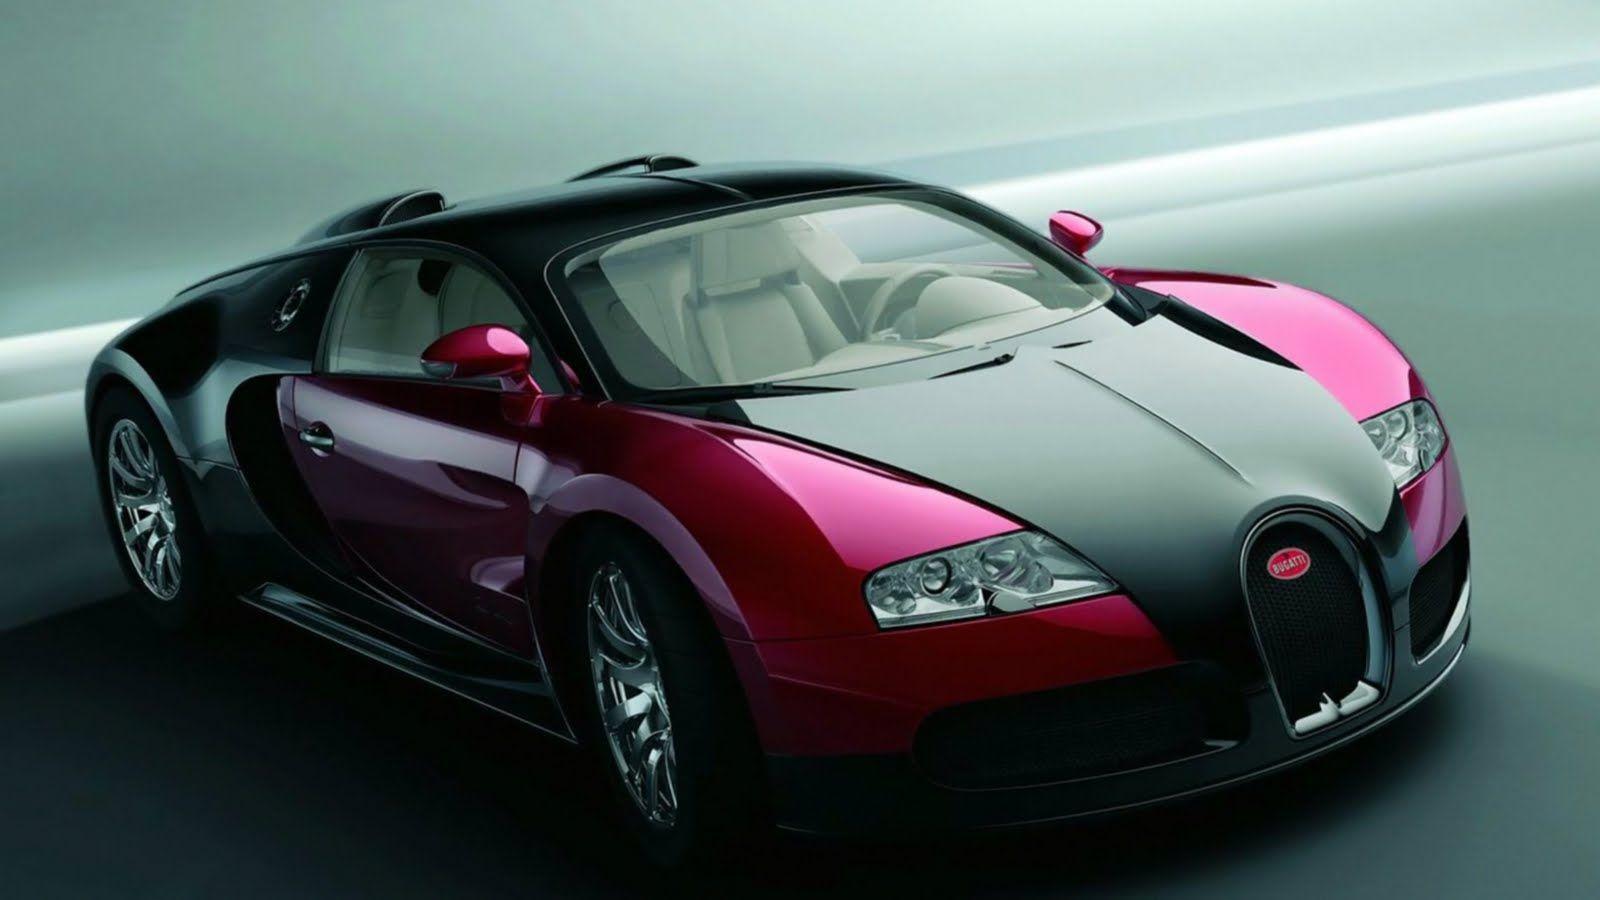 The Bugatti Veyron EB 16.4 Is A Mid Engined Sports Car, Designed